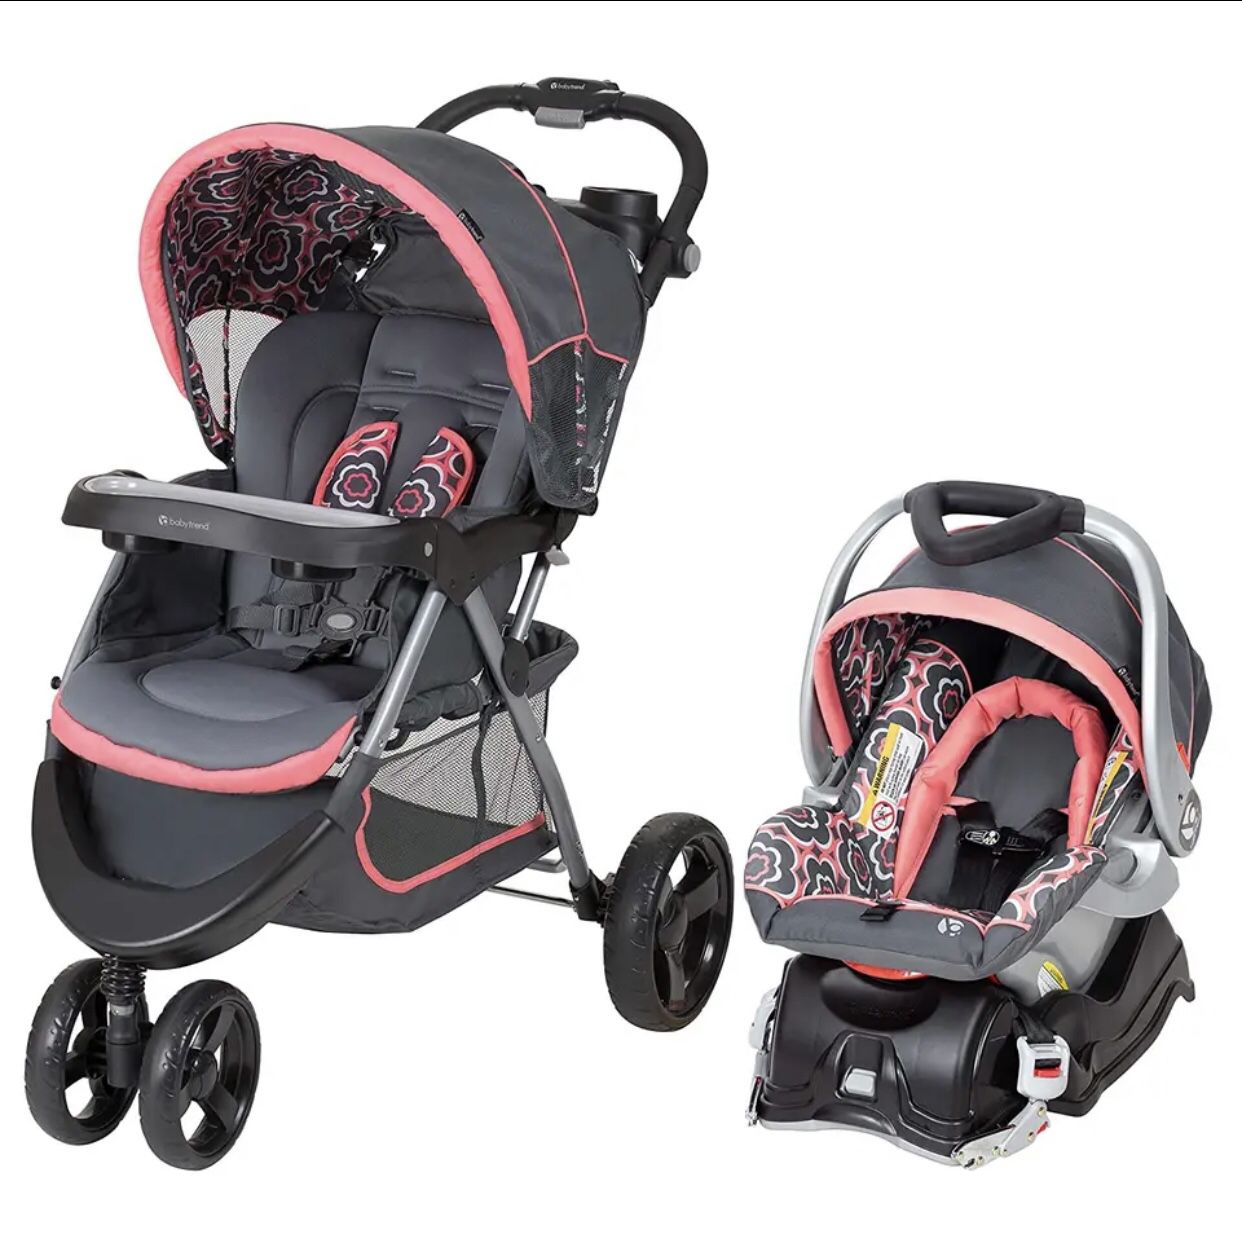 Baby Smooth Ride Travel System Comfortable Safety Ride for Infant, Coral Floral